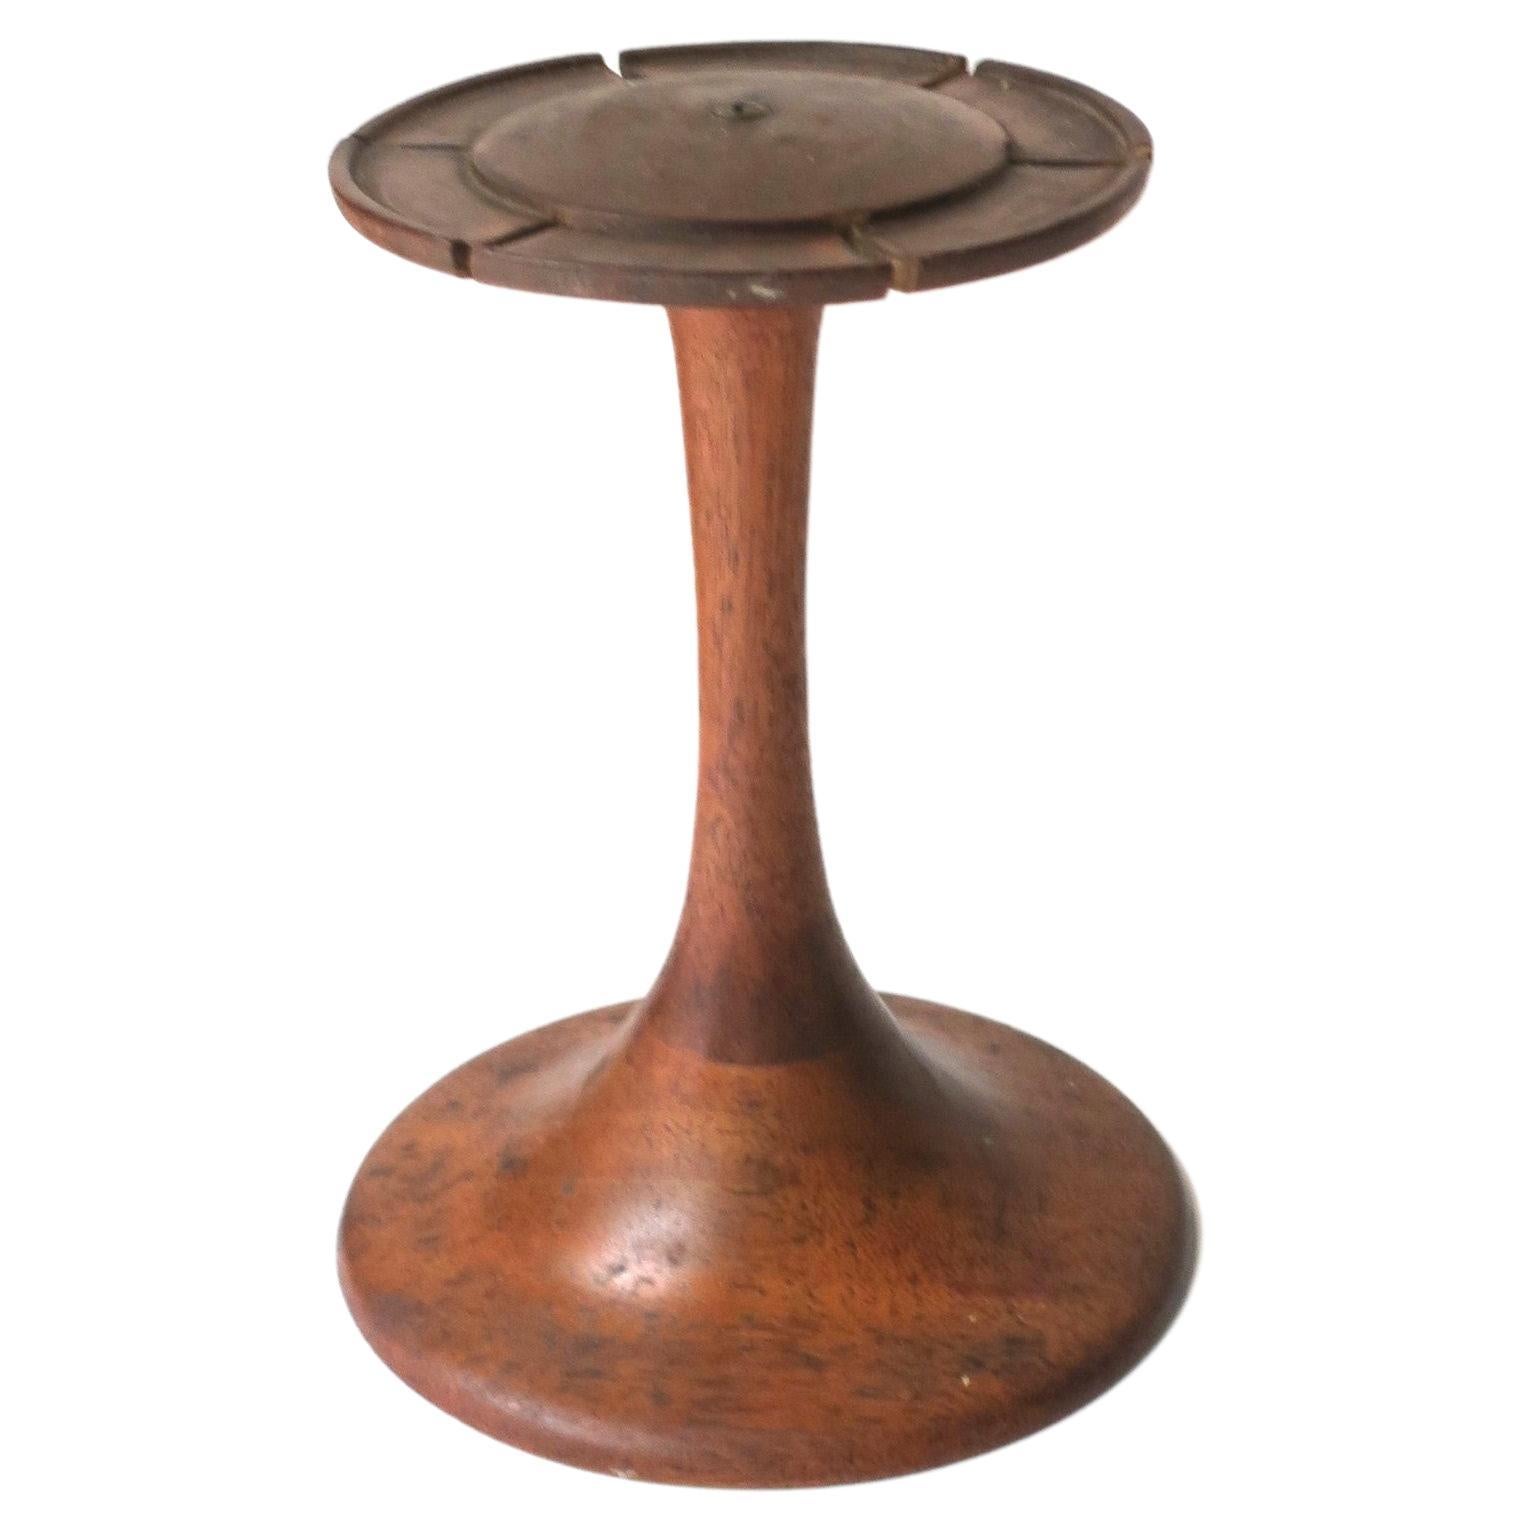 Midcentury Modern Hat Stand For Sale at 1stDibs